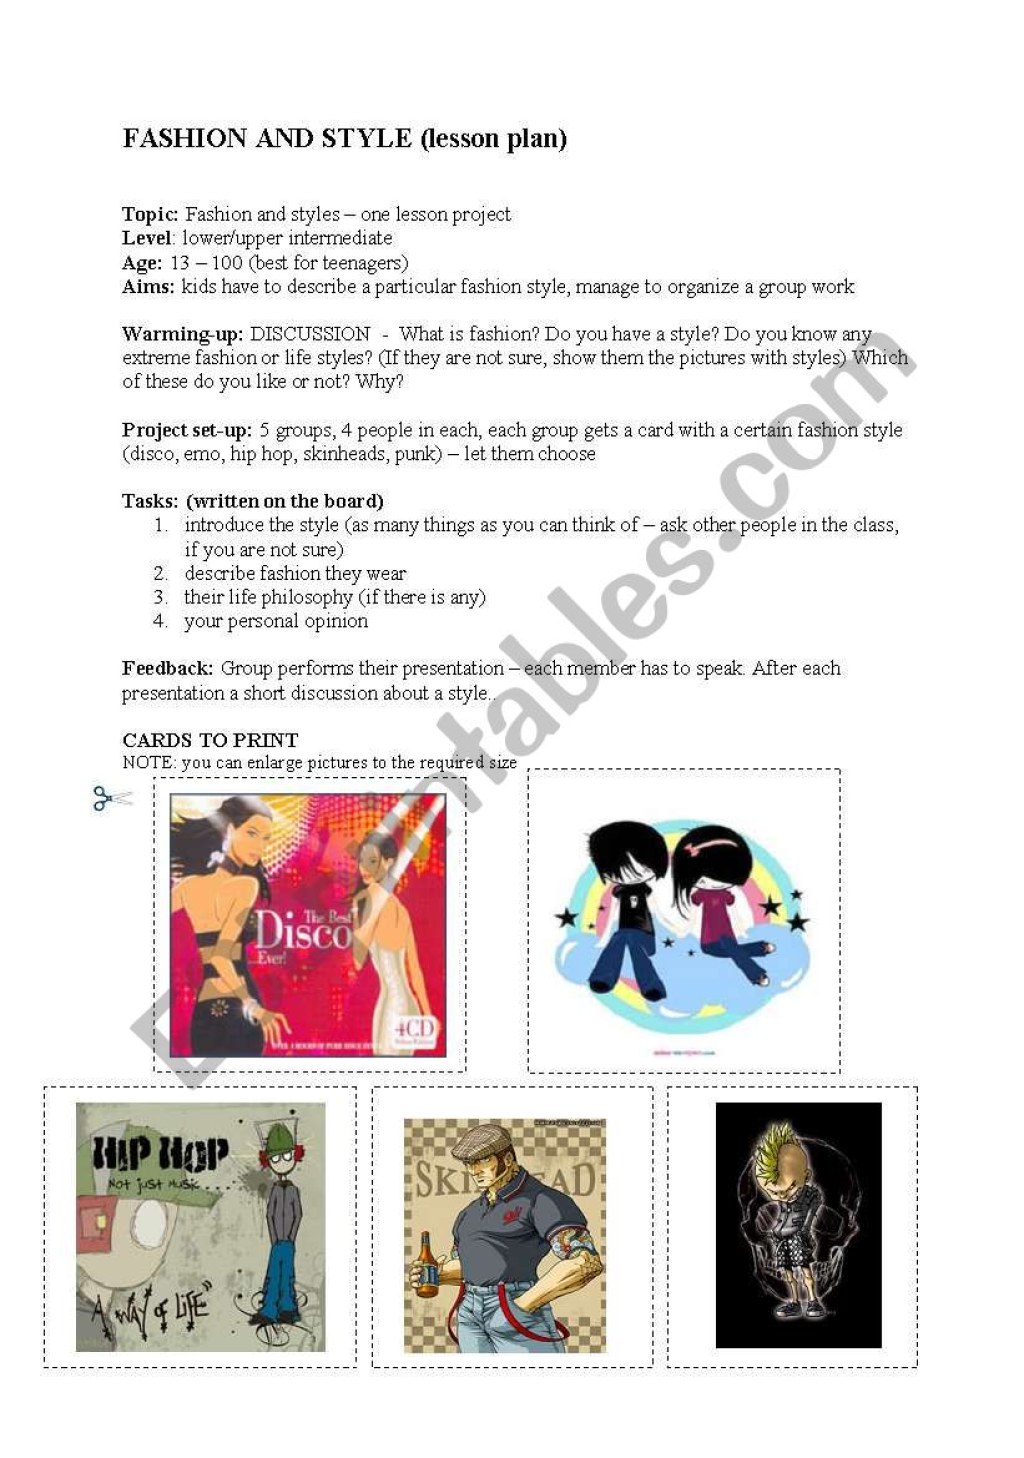 fashion trends lesson plan - Fashion and styles project - ESL worksheet by anettka